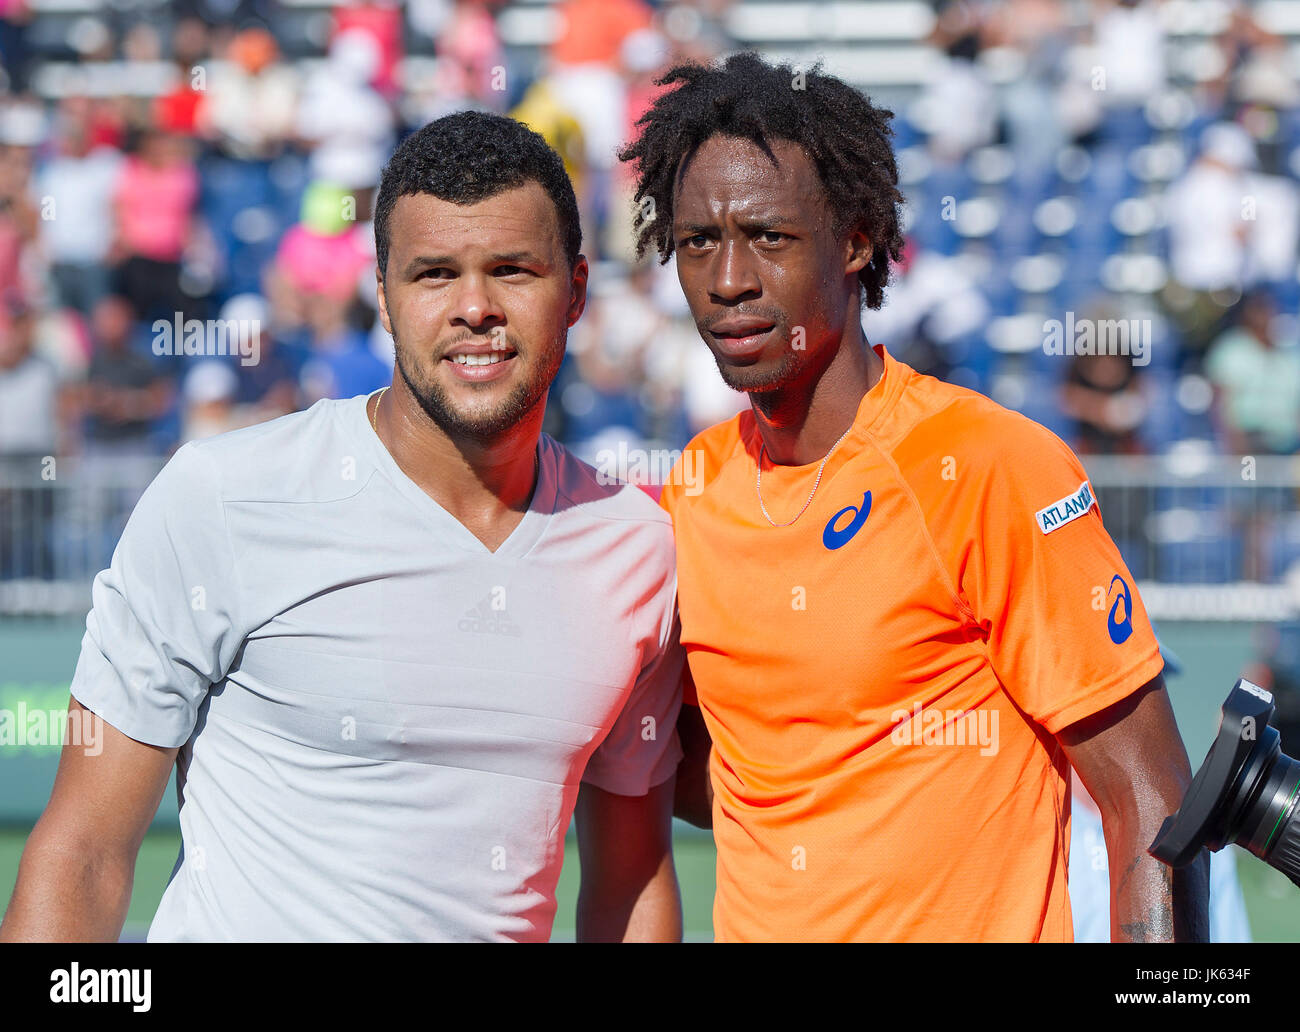 KEY BISCAYNE, FL - March 29: Gael Monfils (FRA) and Jo-Wilfried Tsonga  (FRA) pose together after monfiles defeats Tsonga 64 76(4) at the 2015  Miami Open at the Crandon Tennis Center in